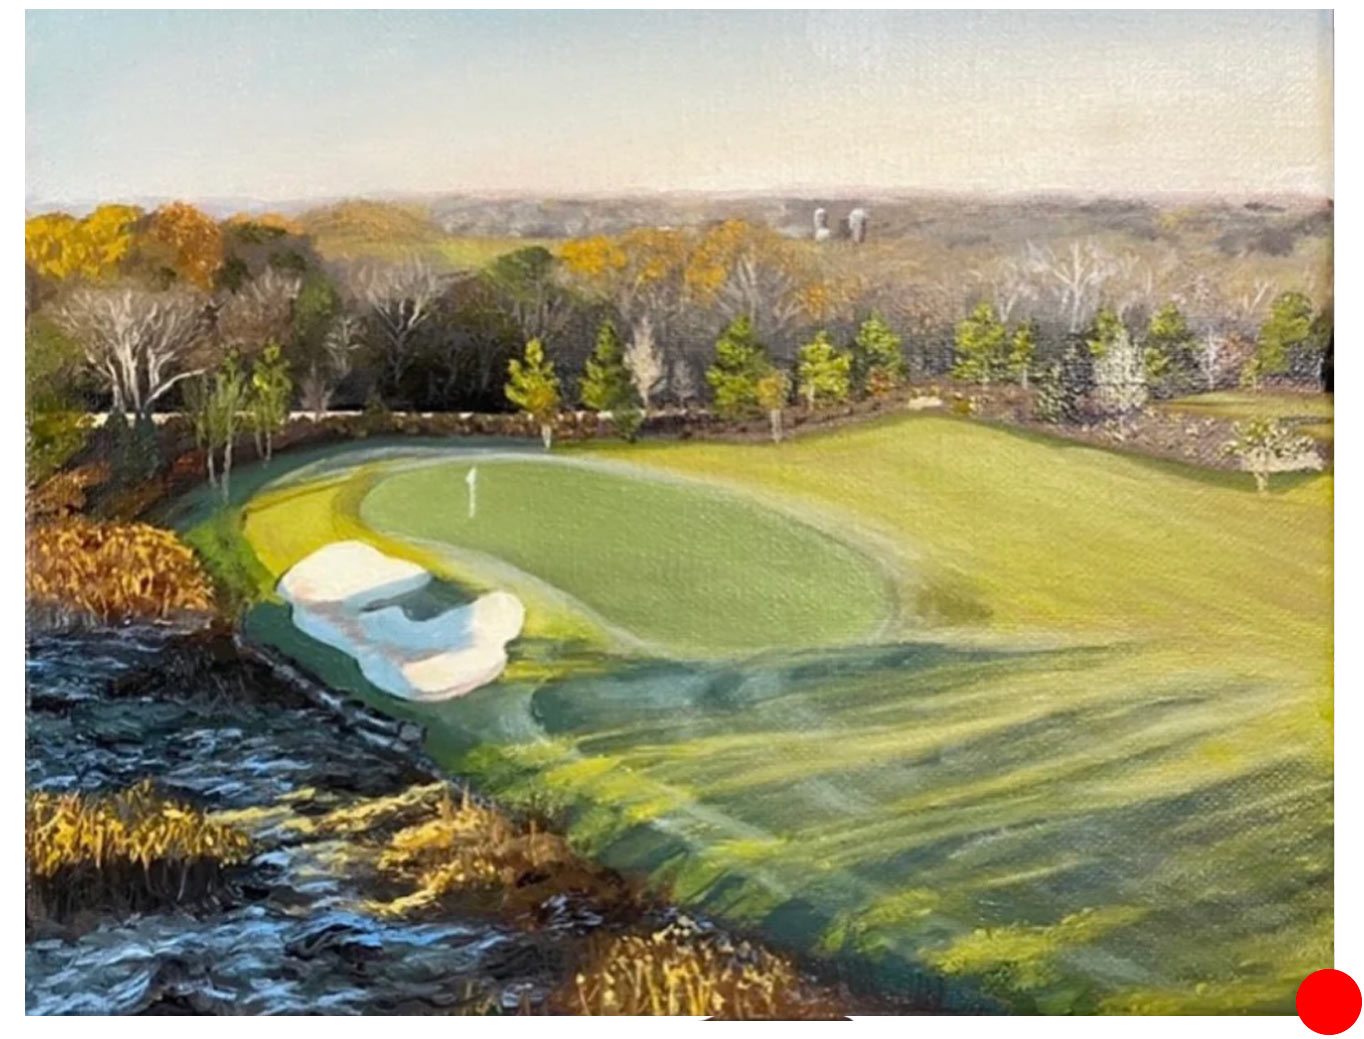 COMMISSION: "No. 4 at Troubadour Golf and Field", 8 x 10 painting